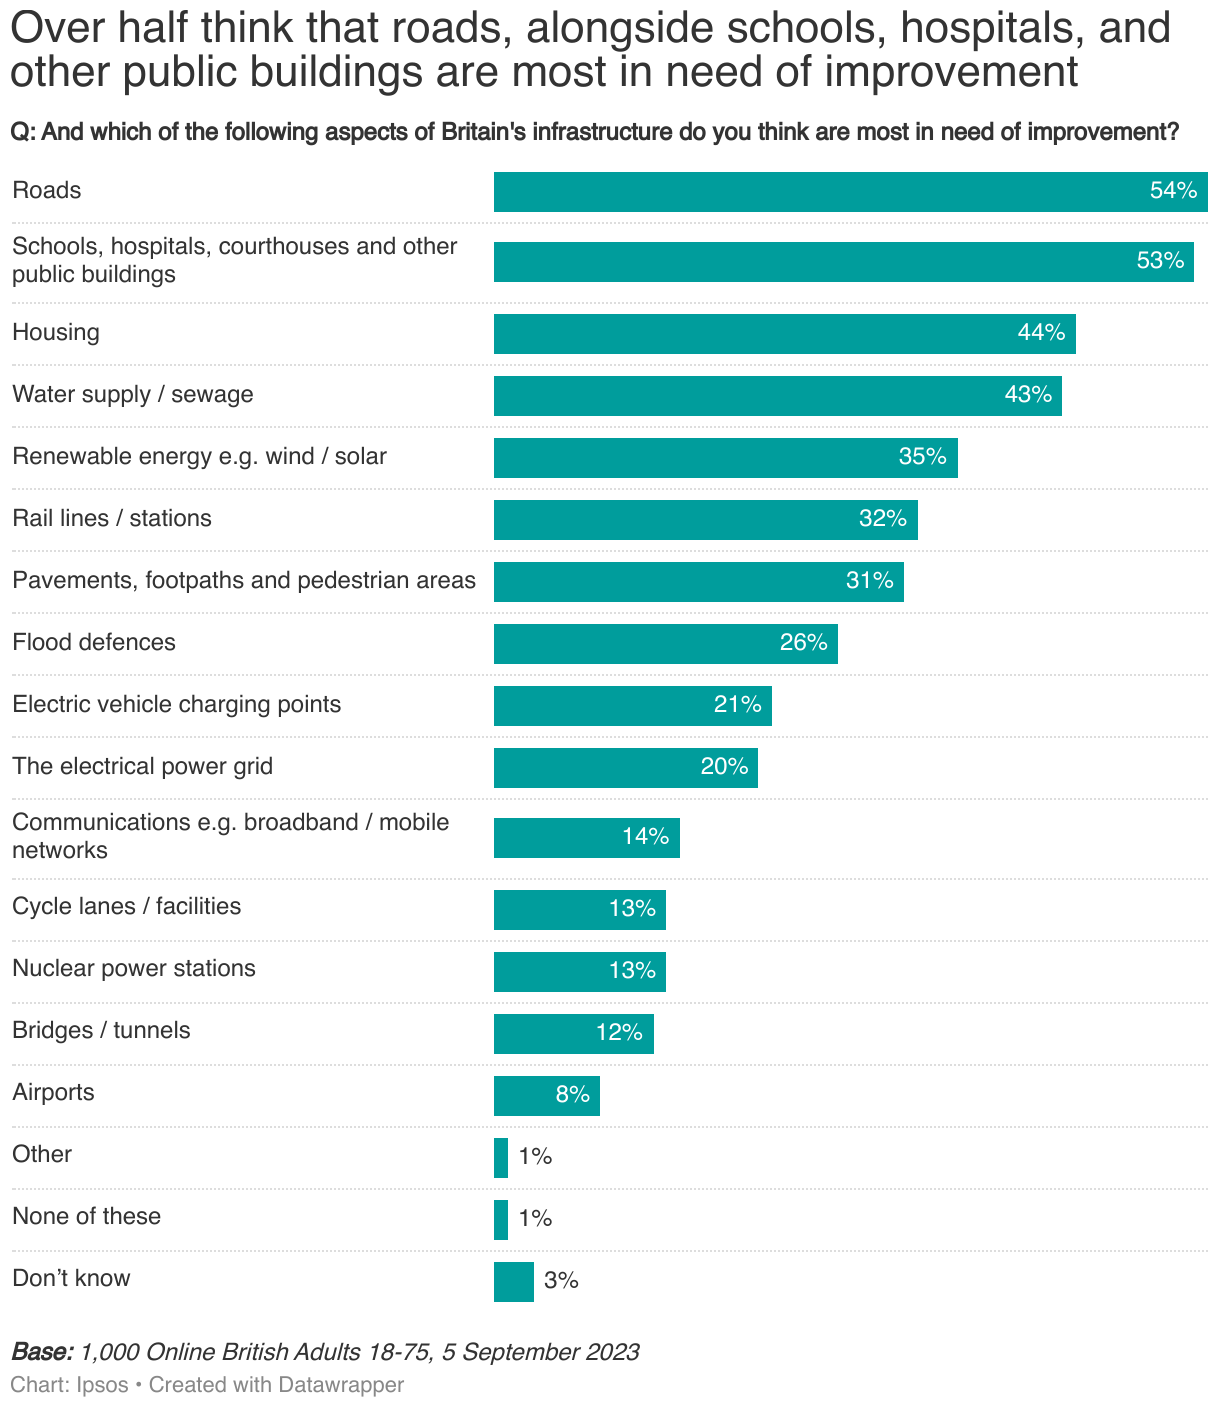 Ipsos Chart: Q: And which of the following aspects of Britain's infrastructure do you think are most in need of improvement (% Agree in need of improvement)
Roads	54%
"Schools, hospitals, courthouses
and other public buildings"	53%
Housing	44%
Water supply / sewage	43%
Renewable energy e.g. wind / solar	35%
Rail lines / stations	32%
Pavements, footpaths and pedestrian areas	31%
Flood defences	26%
Electric vehicle charging points	21%
The electrical power grid	20%
Communications e.g. broadband / mobile networks	14%
Cycle lanes / facilities	13%
Nuclear power stations	13%
Bridges / tunnels	12%
Airports	8%
Other	1%
None of these	1%
Don’t know	3%